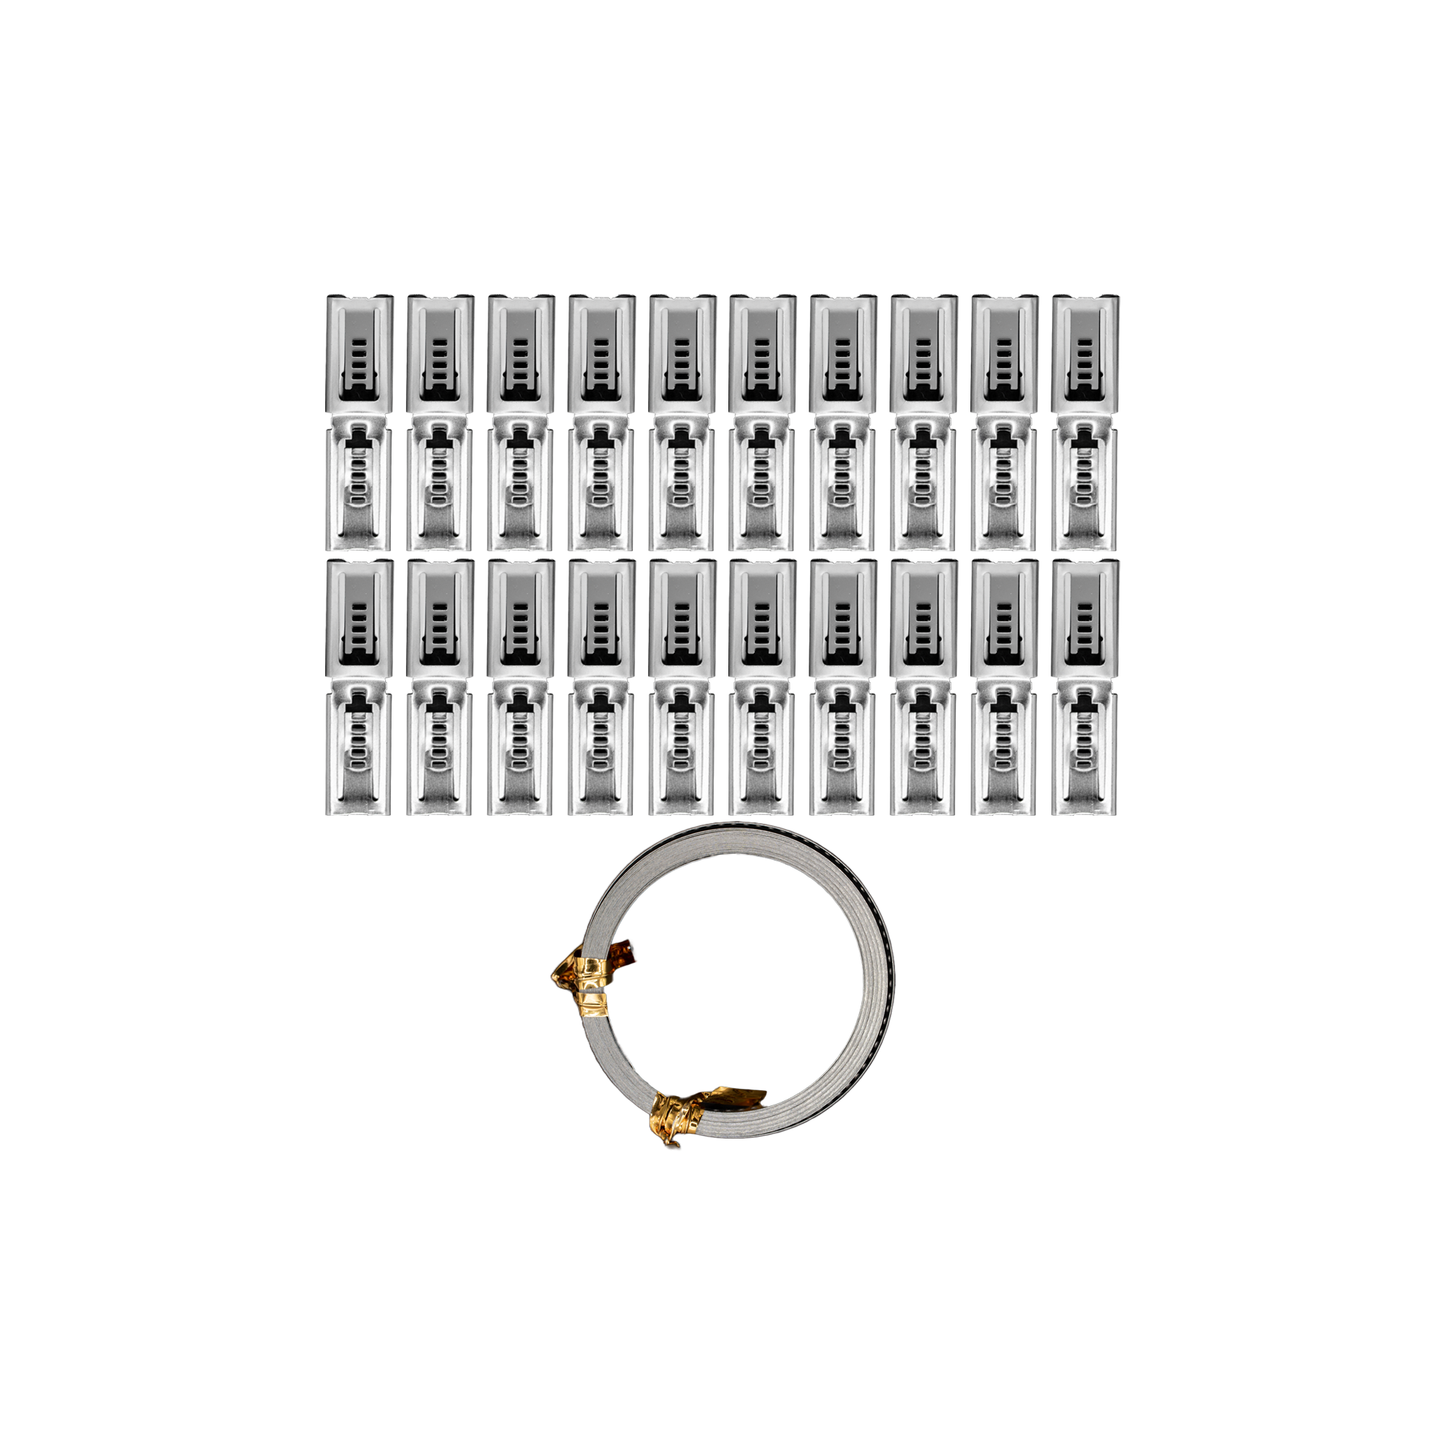 Roll of Stainless Steel Hose Band With 10 Clamps